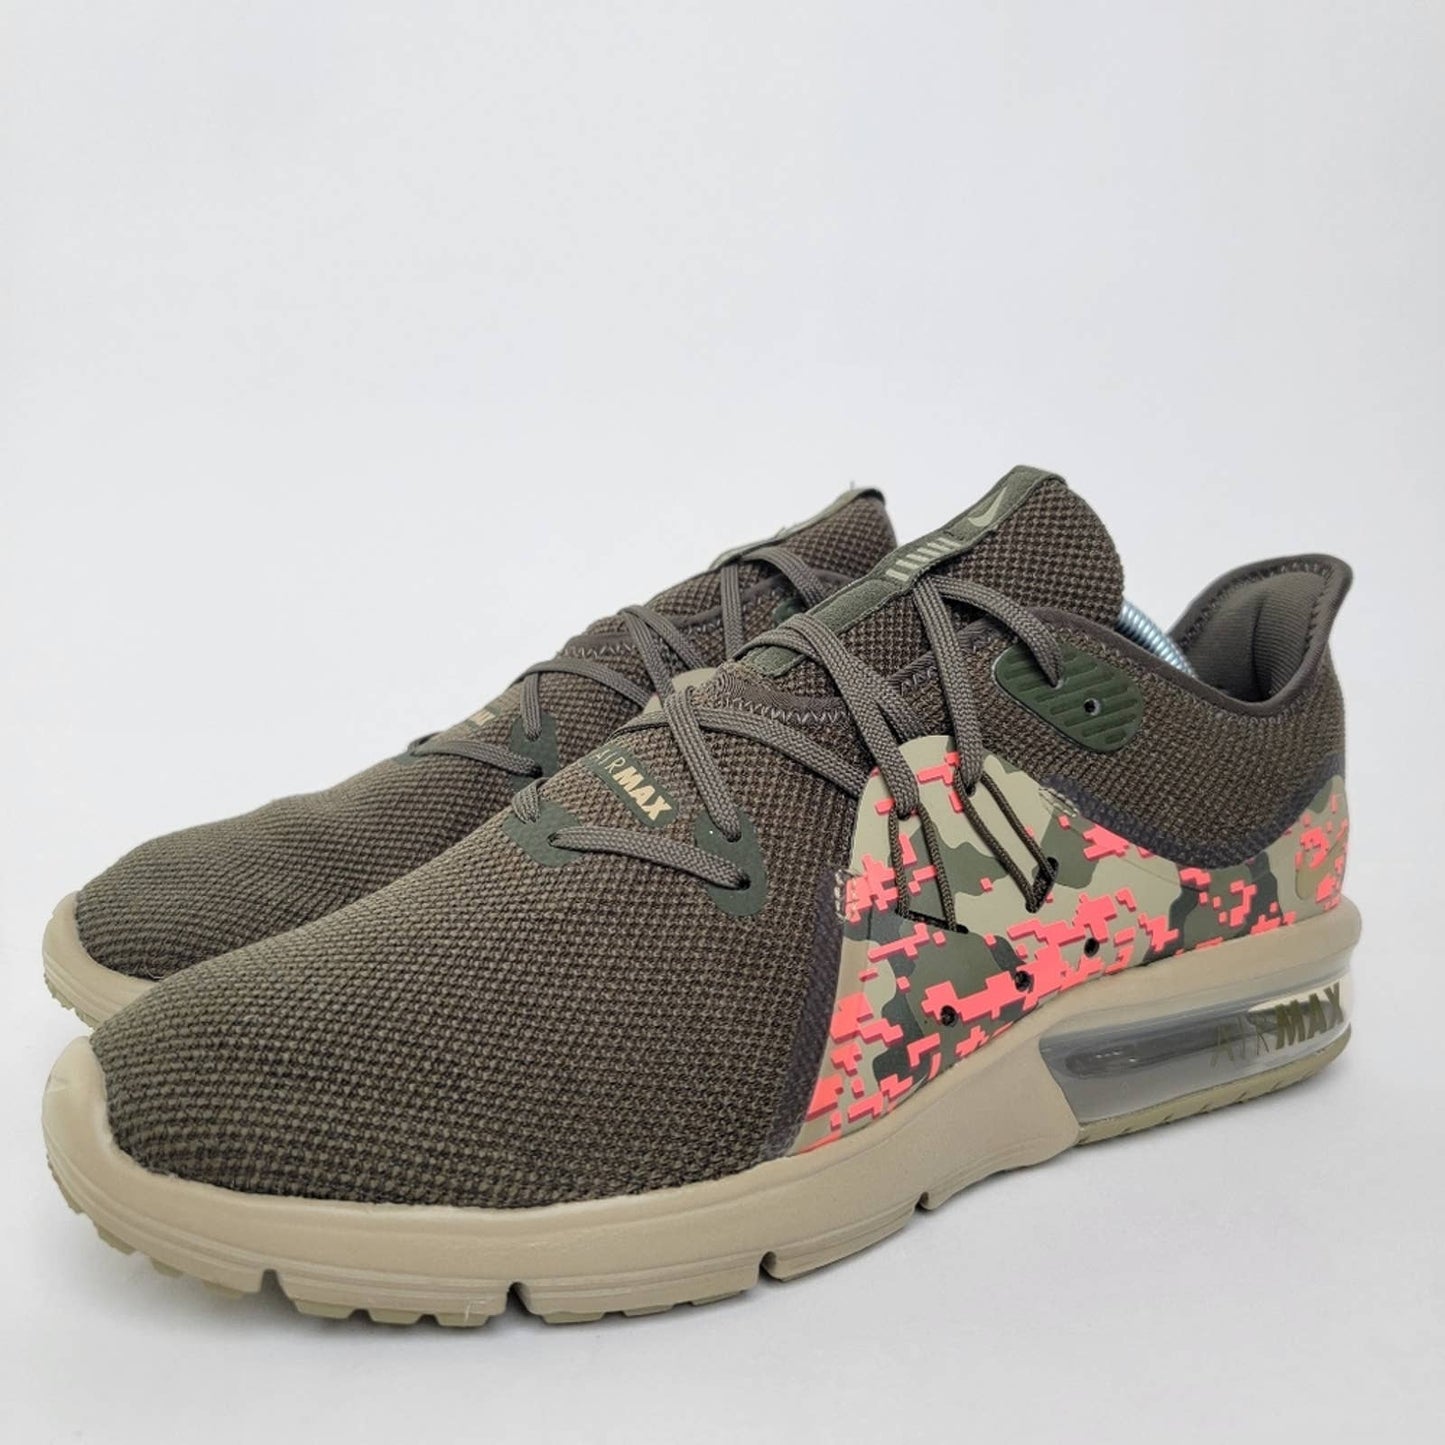 Nike Air Max Sequent 3 C Neutral Olive Sneakers - 10.5 / 12